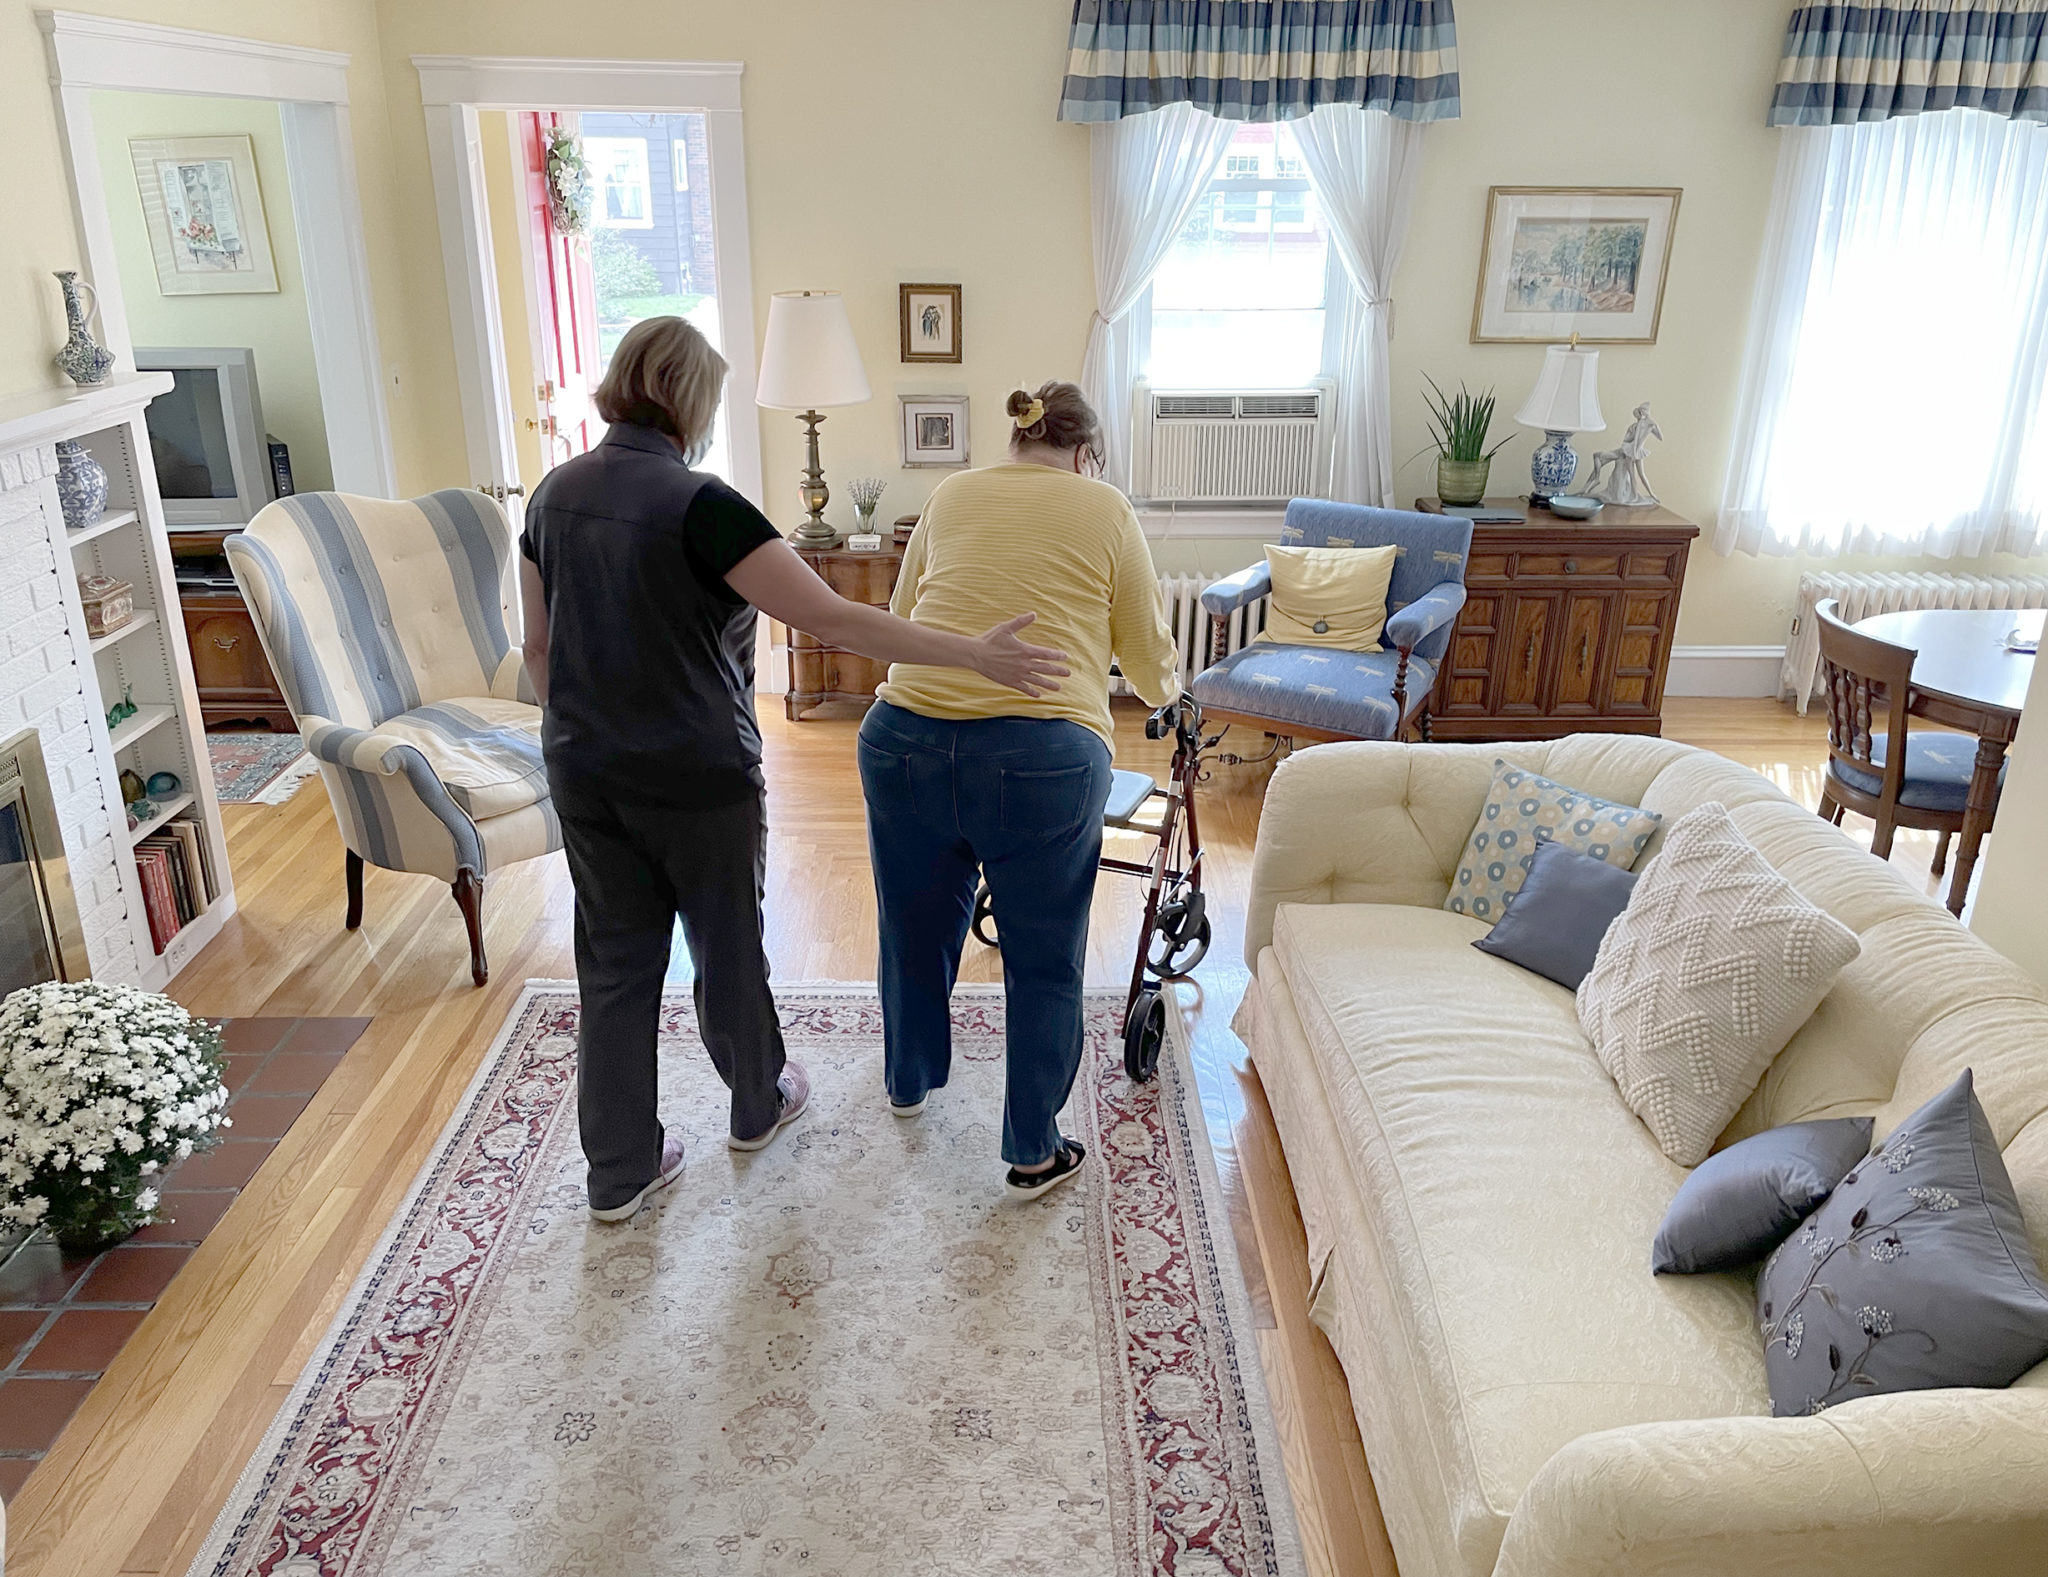 Physical therapy assistant walks behind older woman with walker in living room